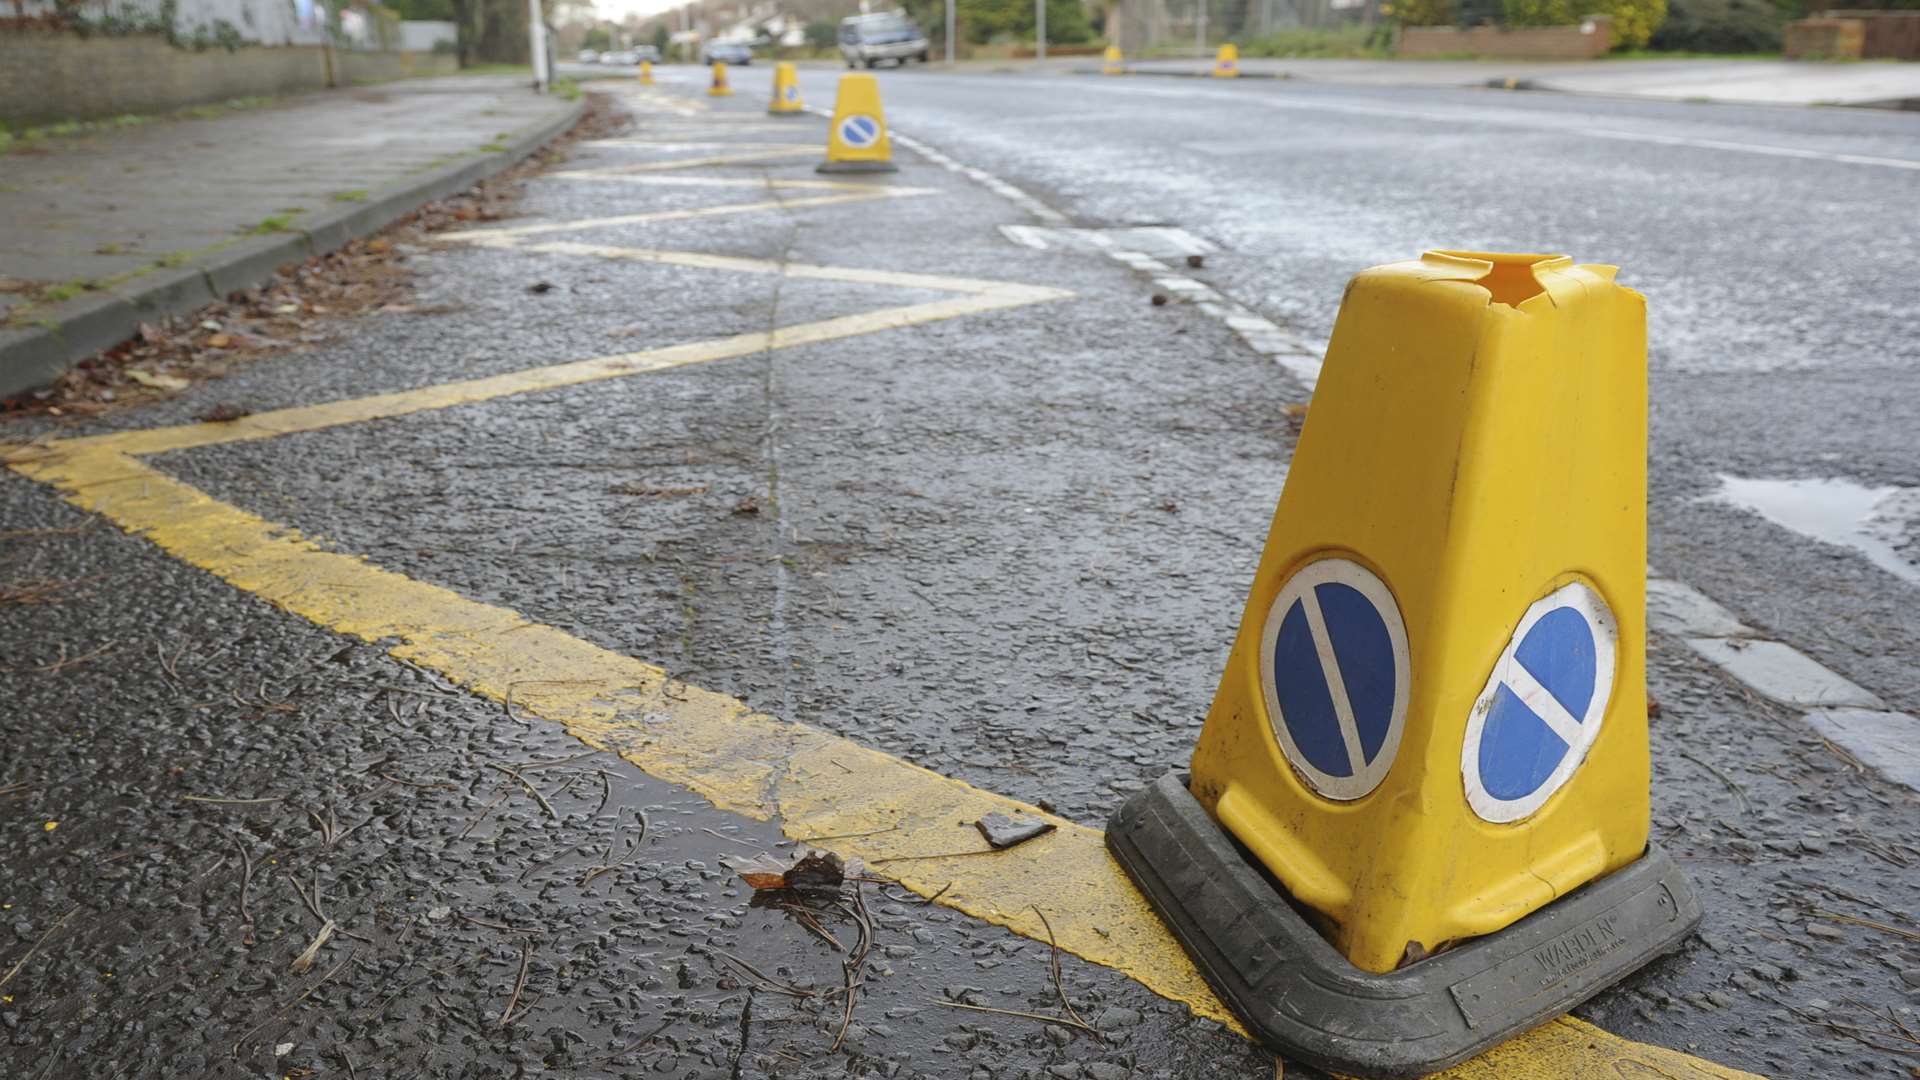 Zig Zag lines and cones near a school. Stock image